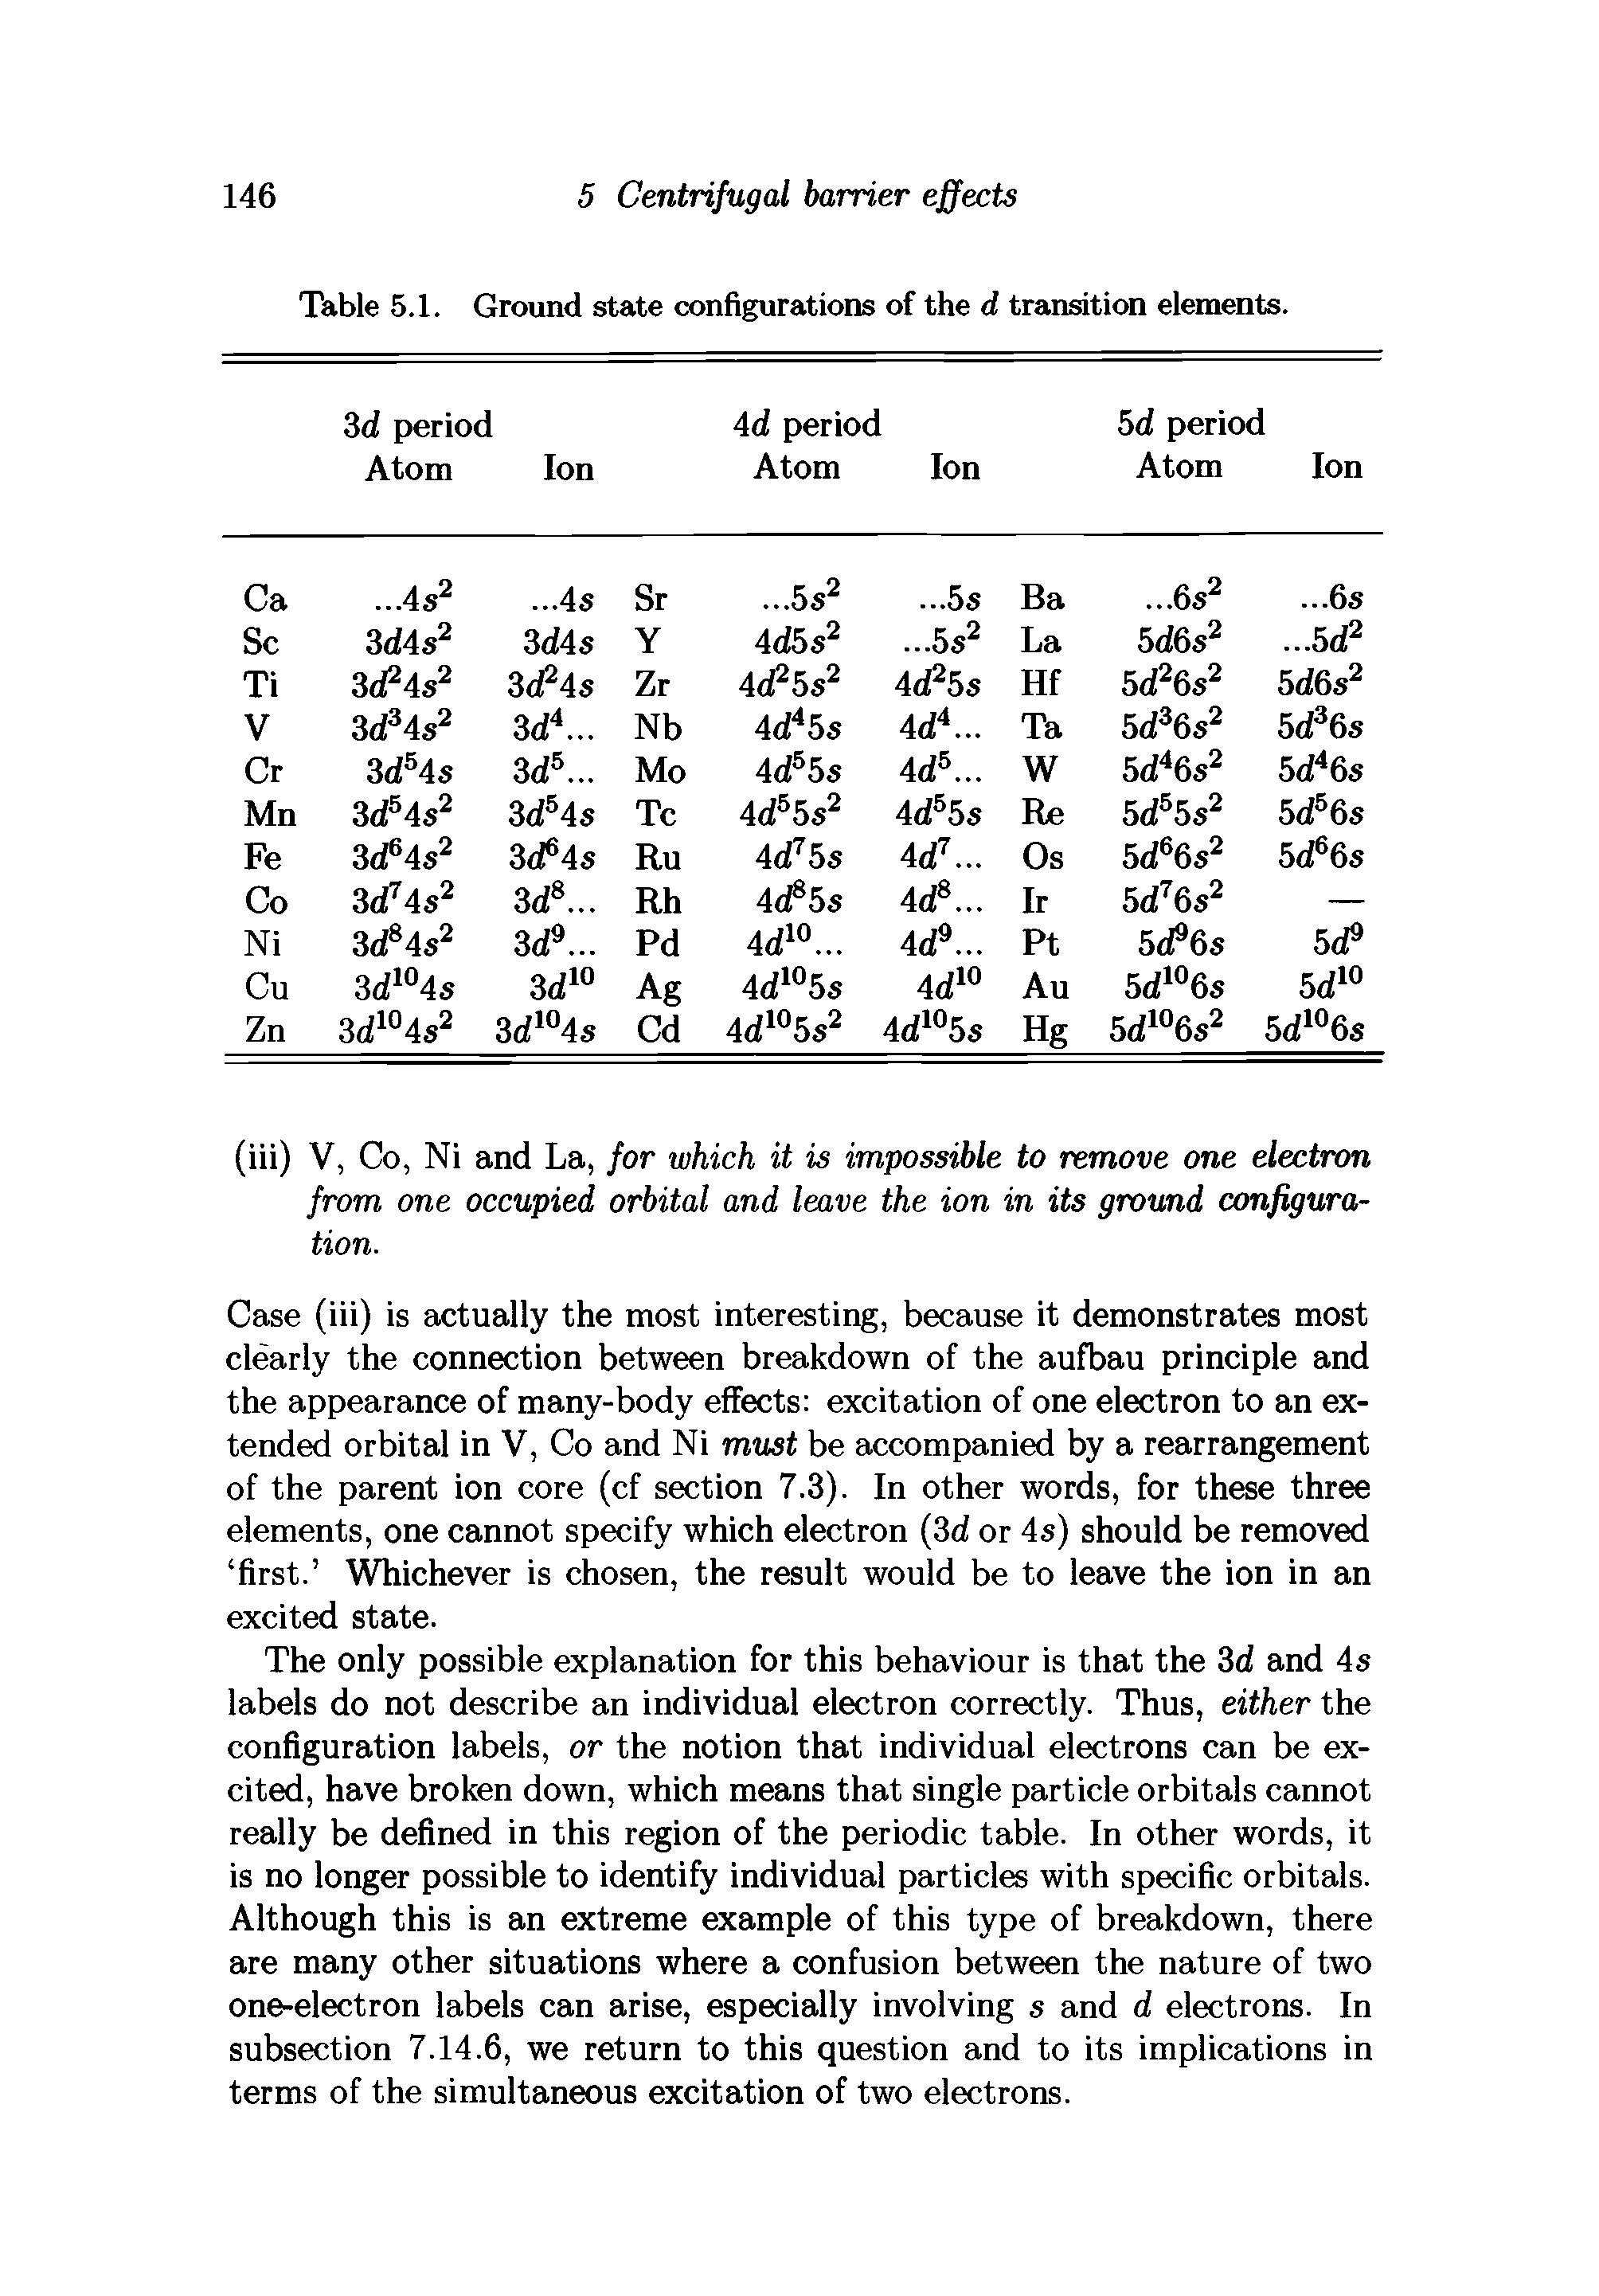 Table 5.1. Ground state configurations of the d transition elements.